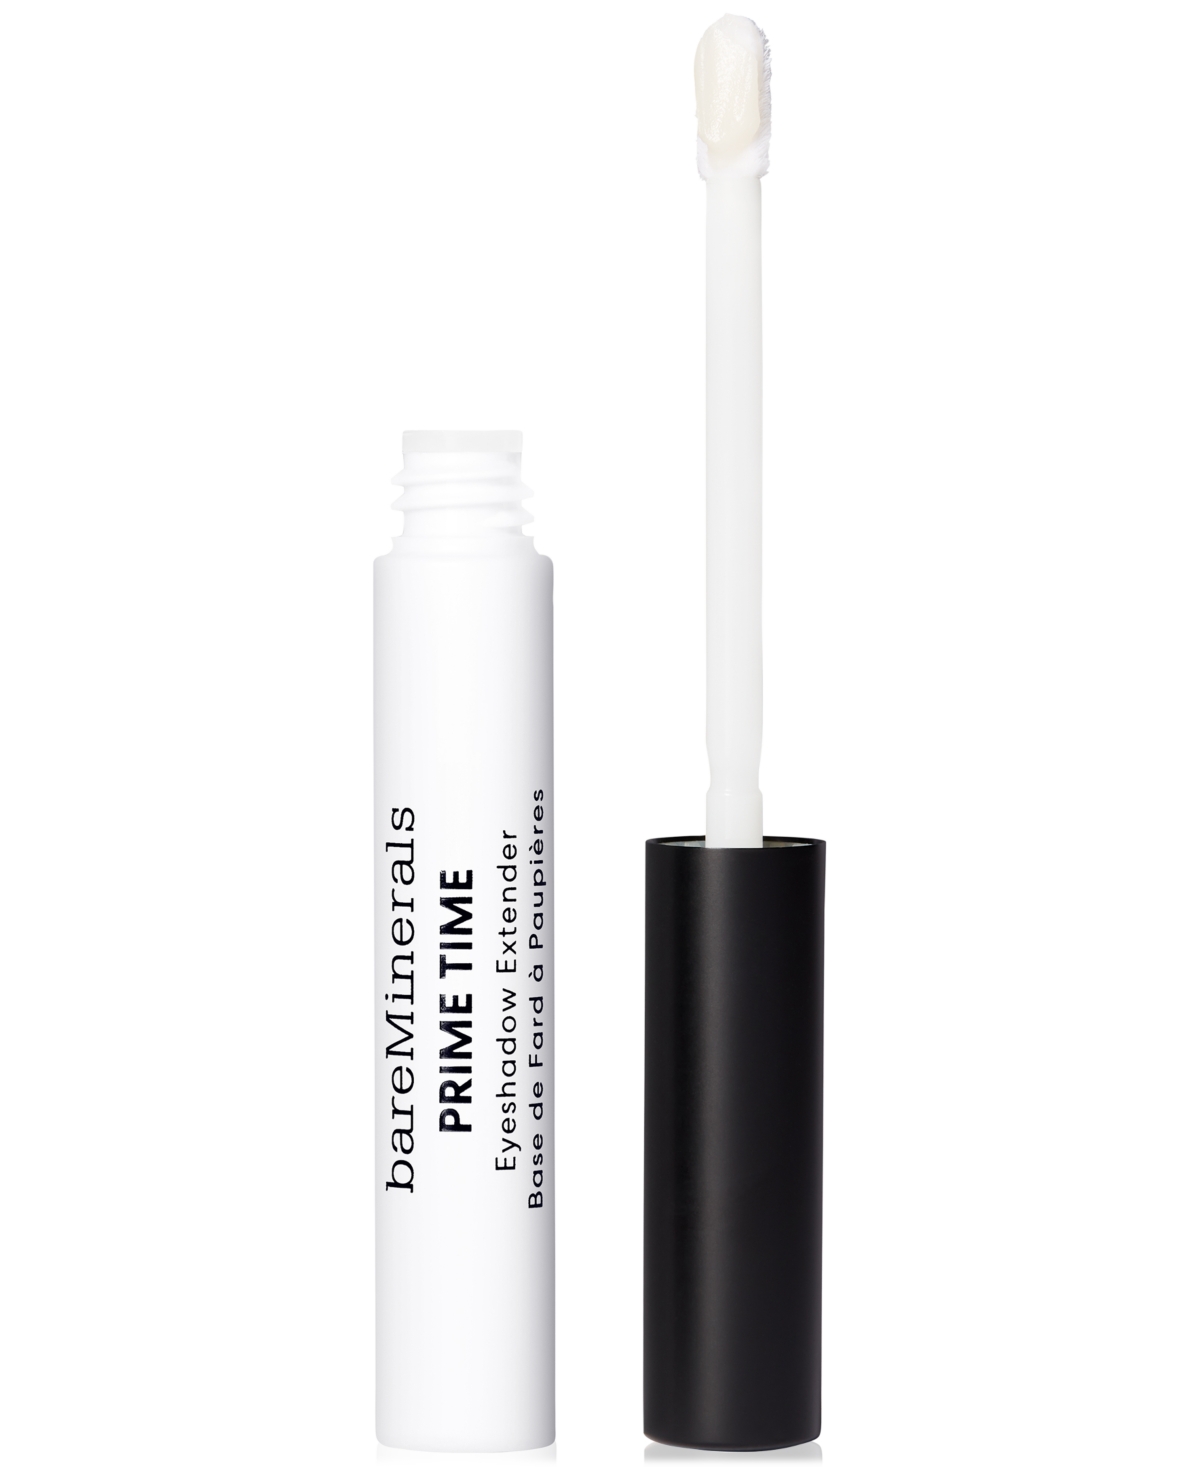 Bareminerals Prime Time Eyeshadow Extender In No Color